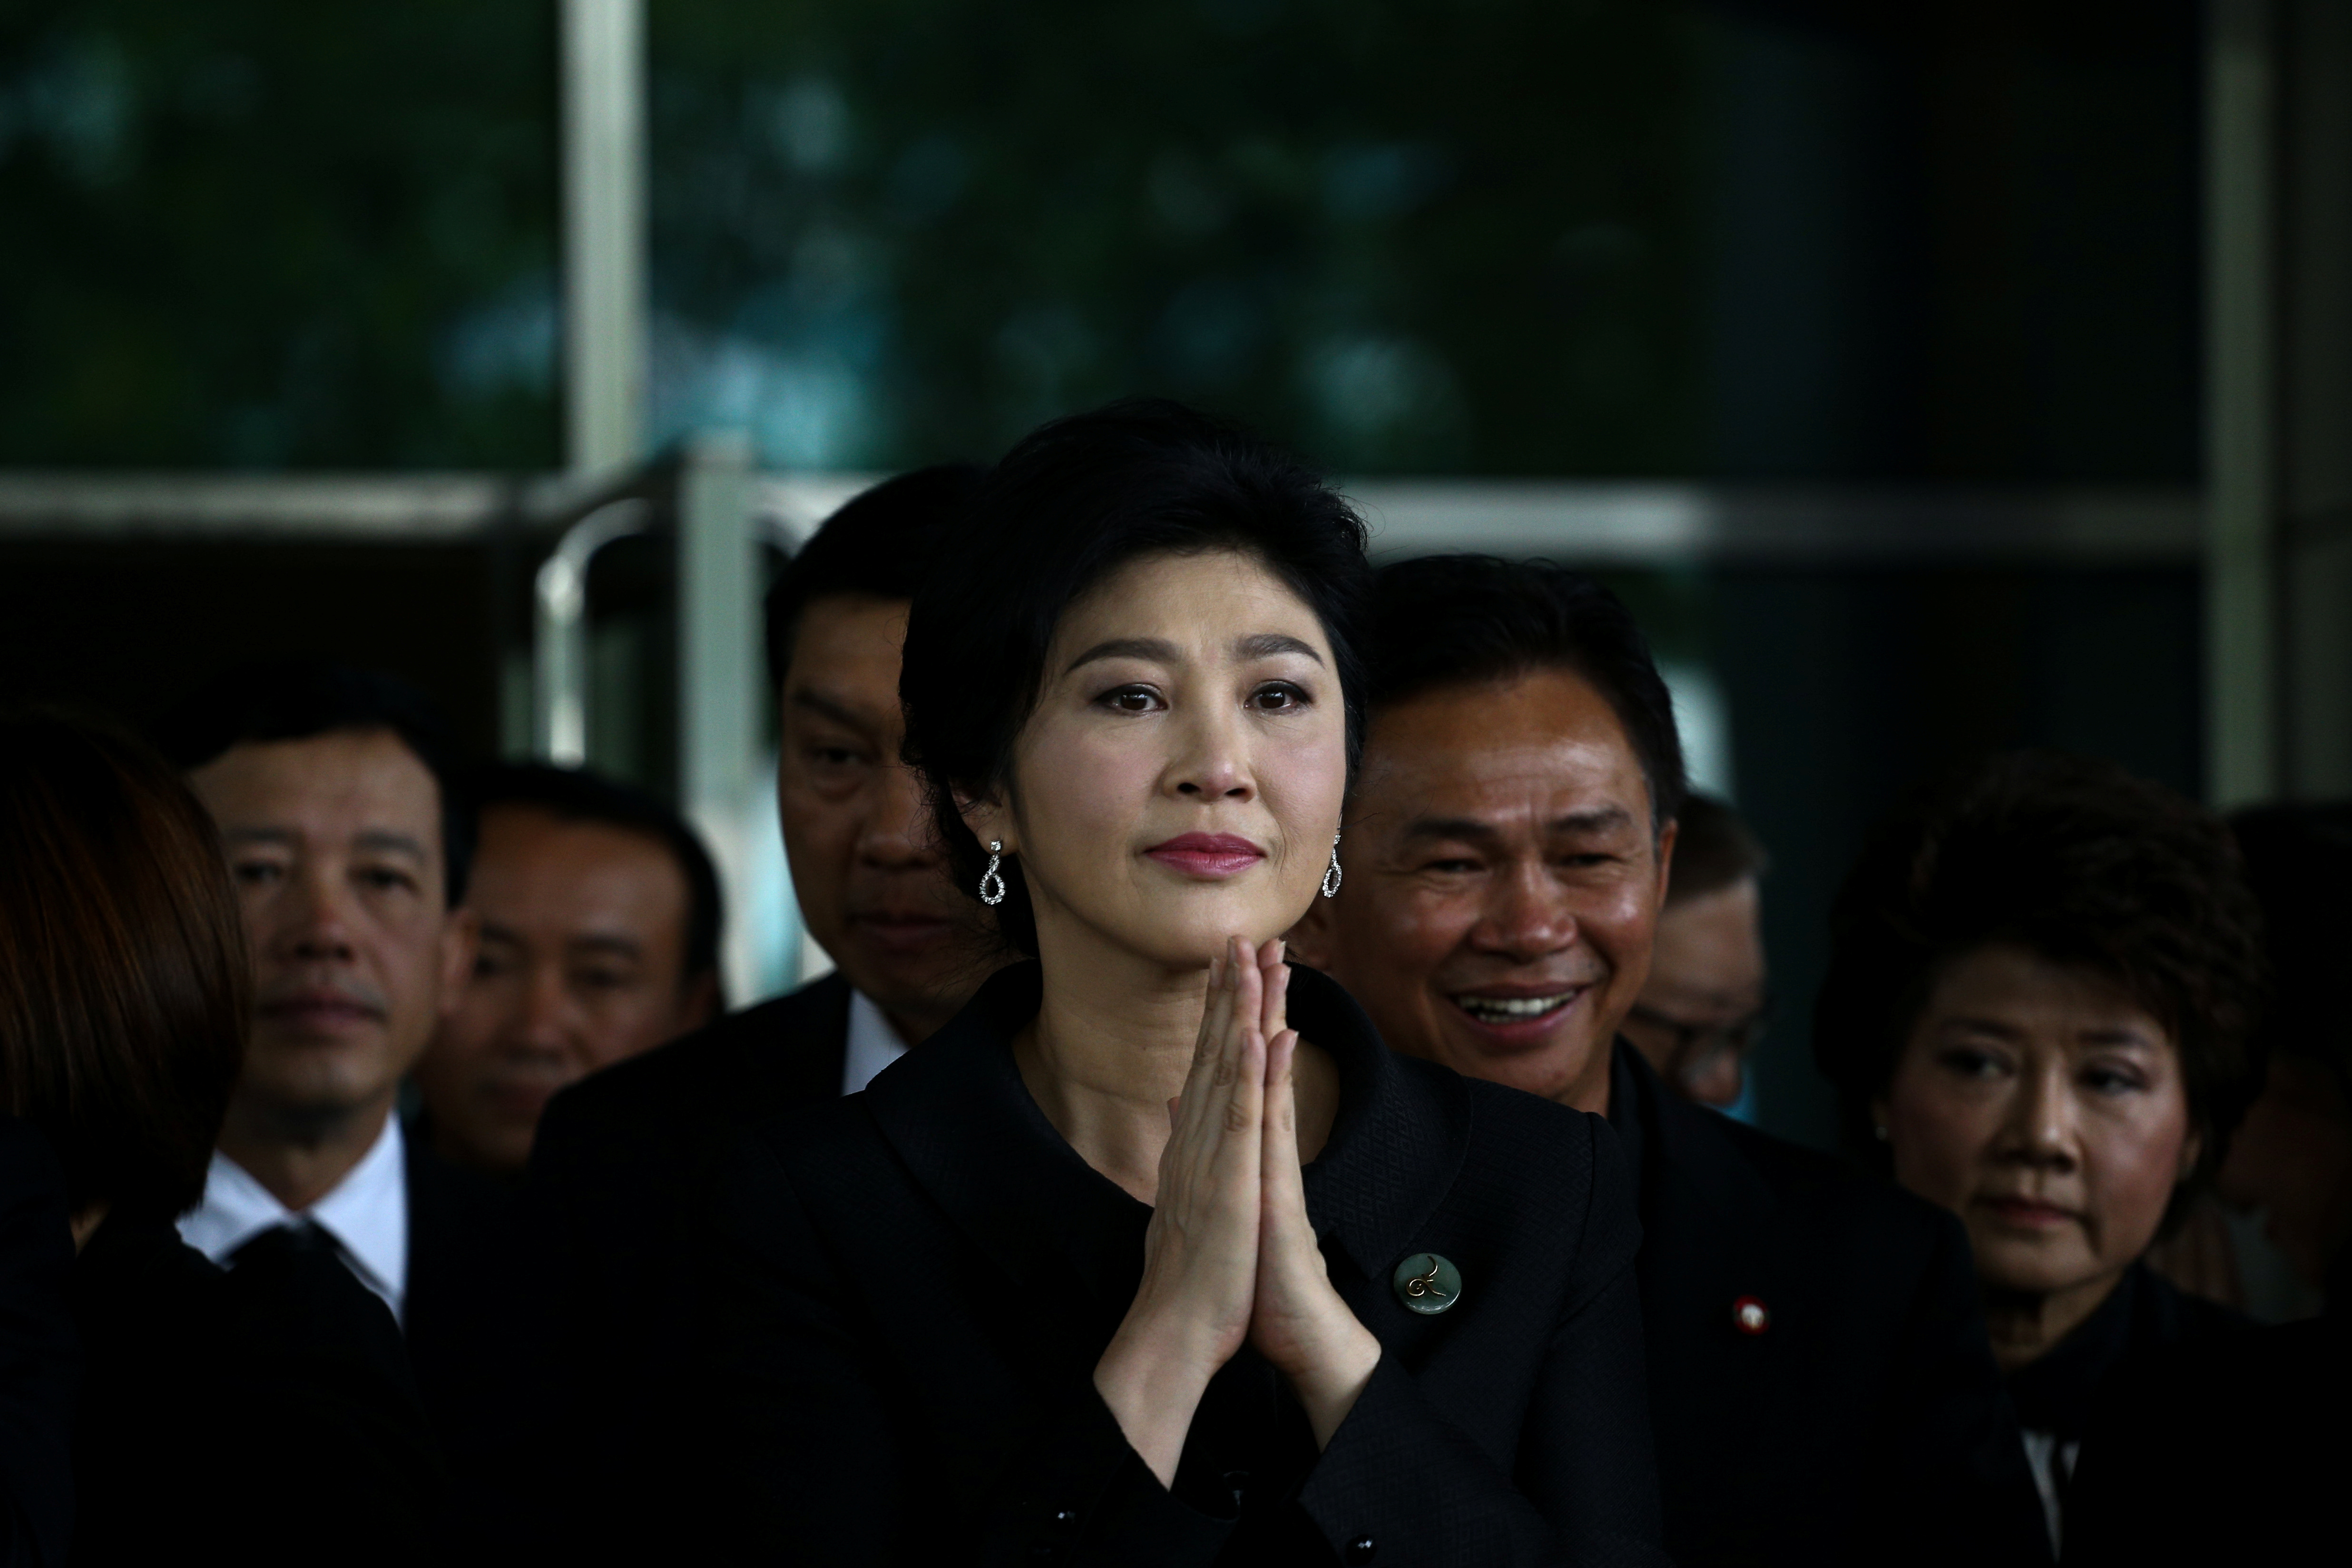 Ousted former Thai prime minister Yingluck Shinawatra greets supporters as she arrives at the Supreme Court in Bangkok